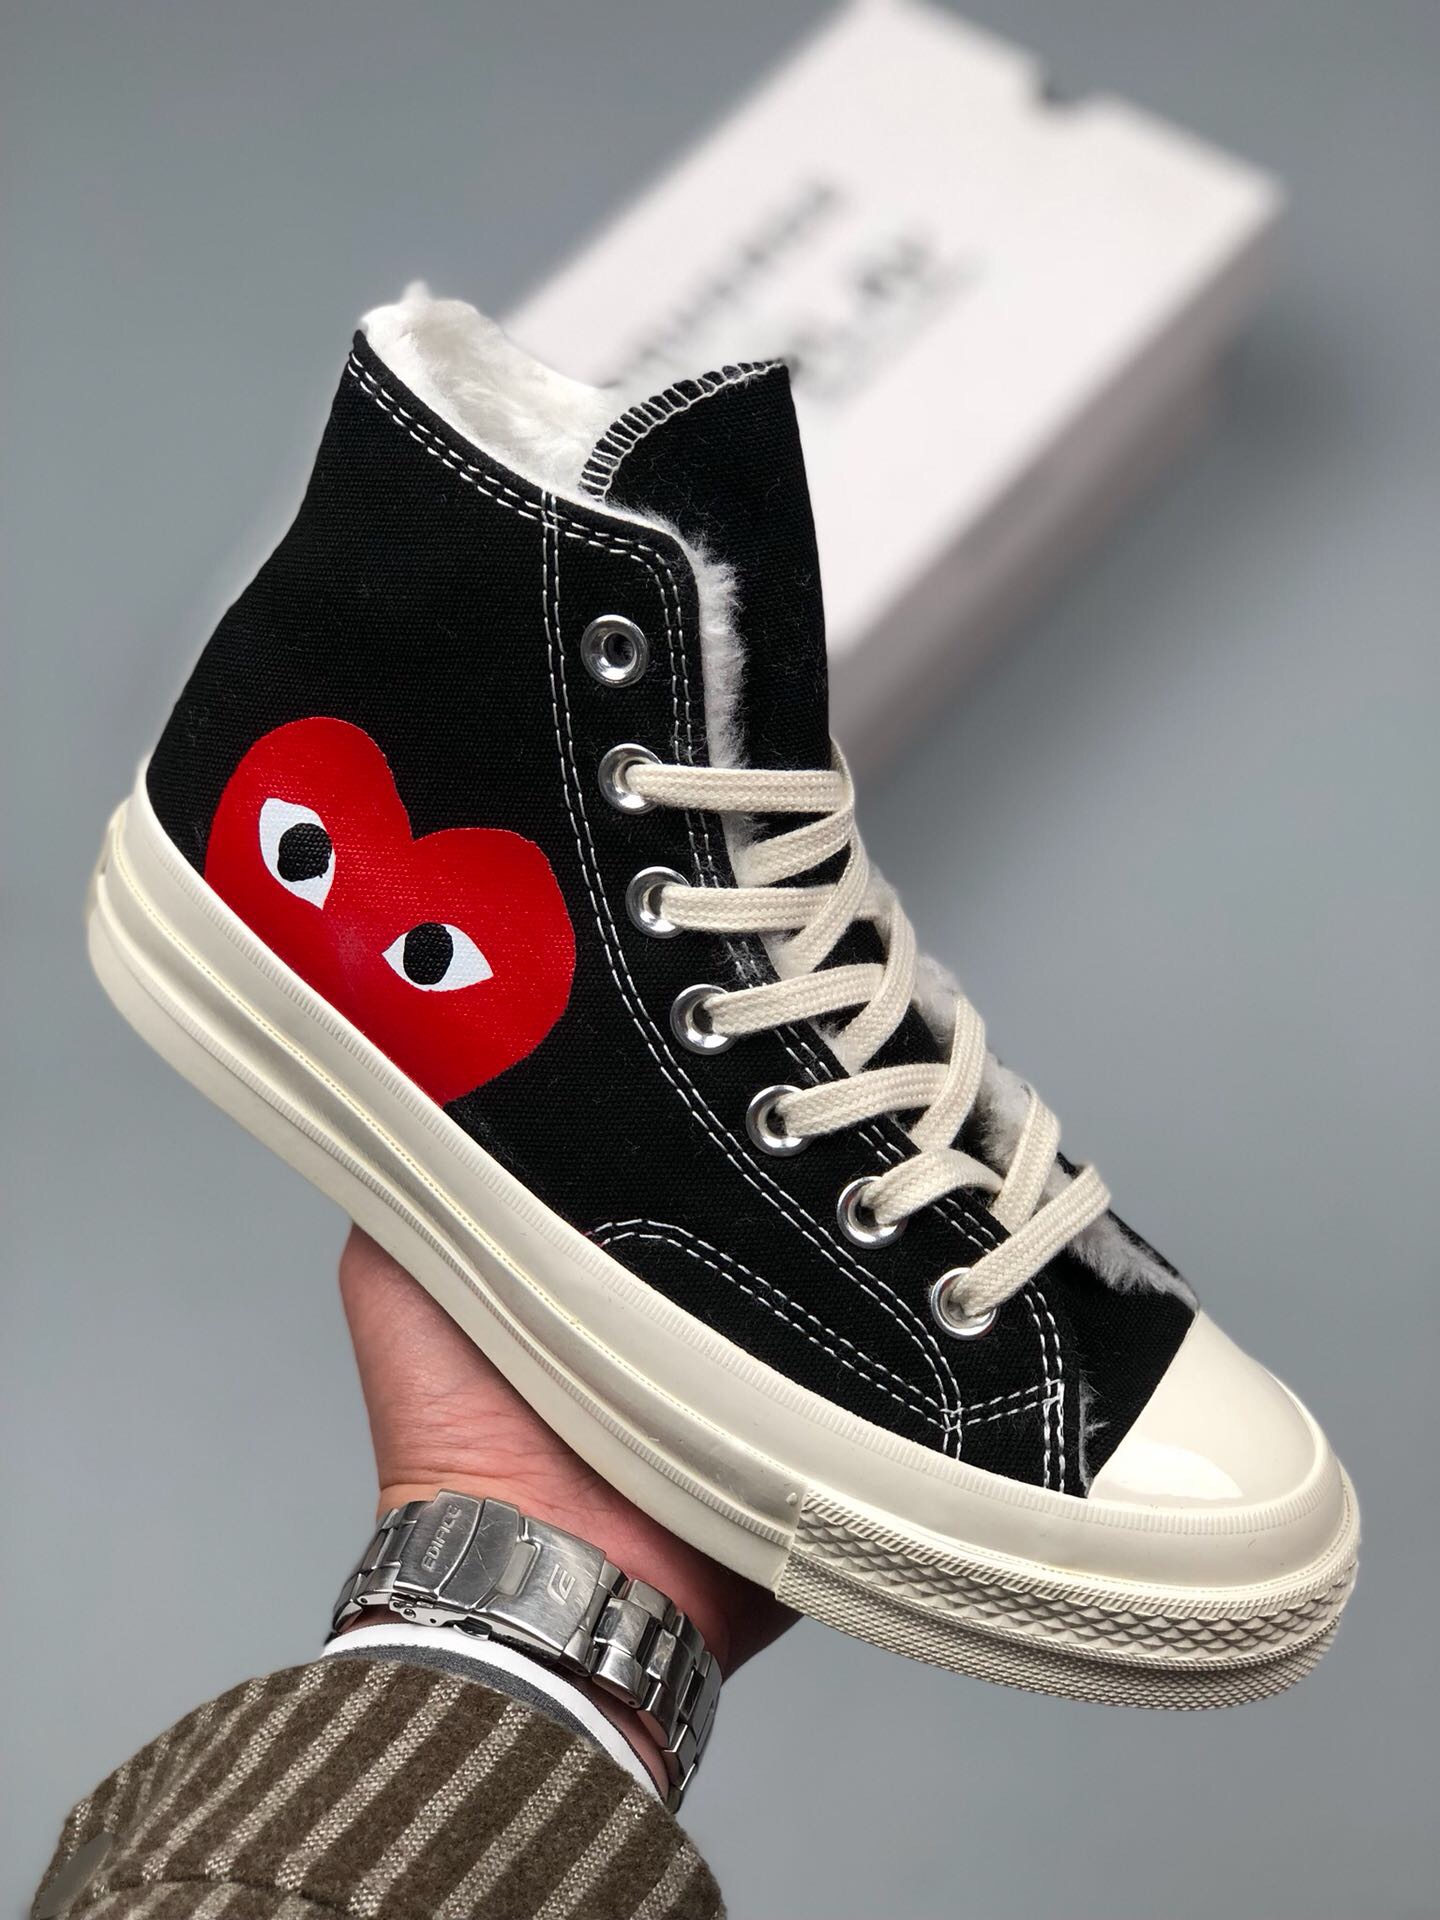 COMME des GARCONS x Converse Chuck Taylor All Star 70 Black For Sale Hello